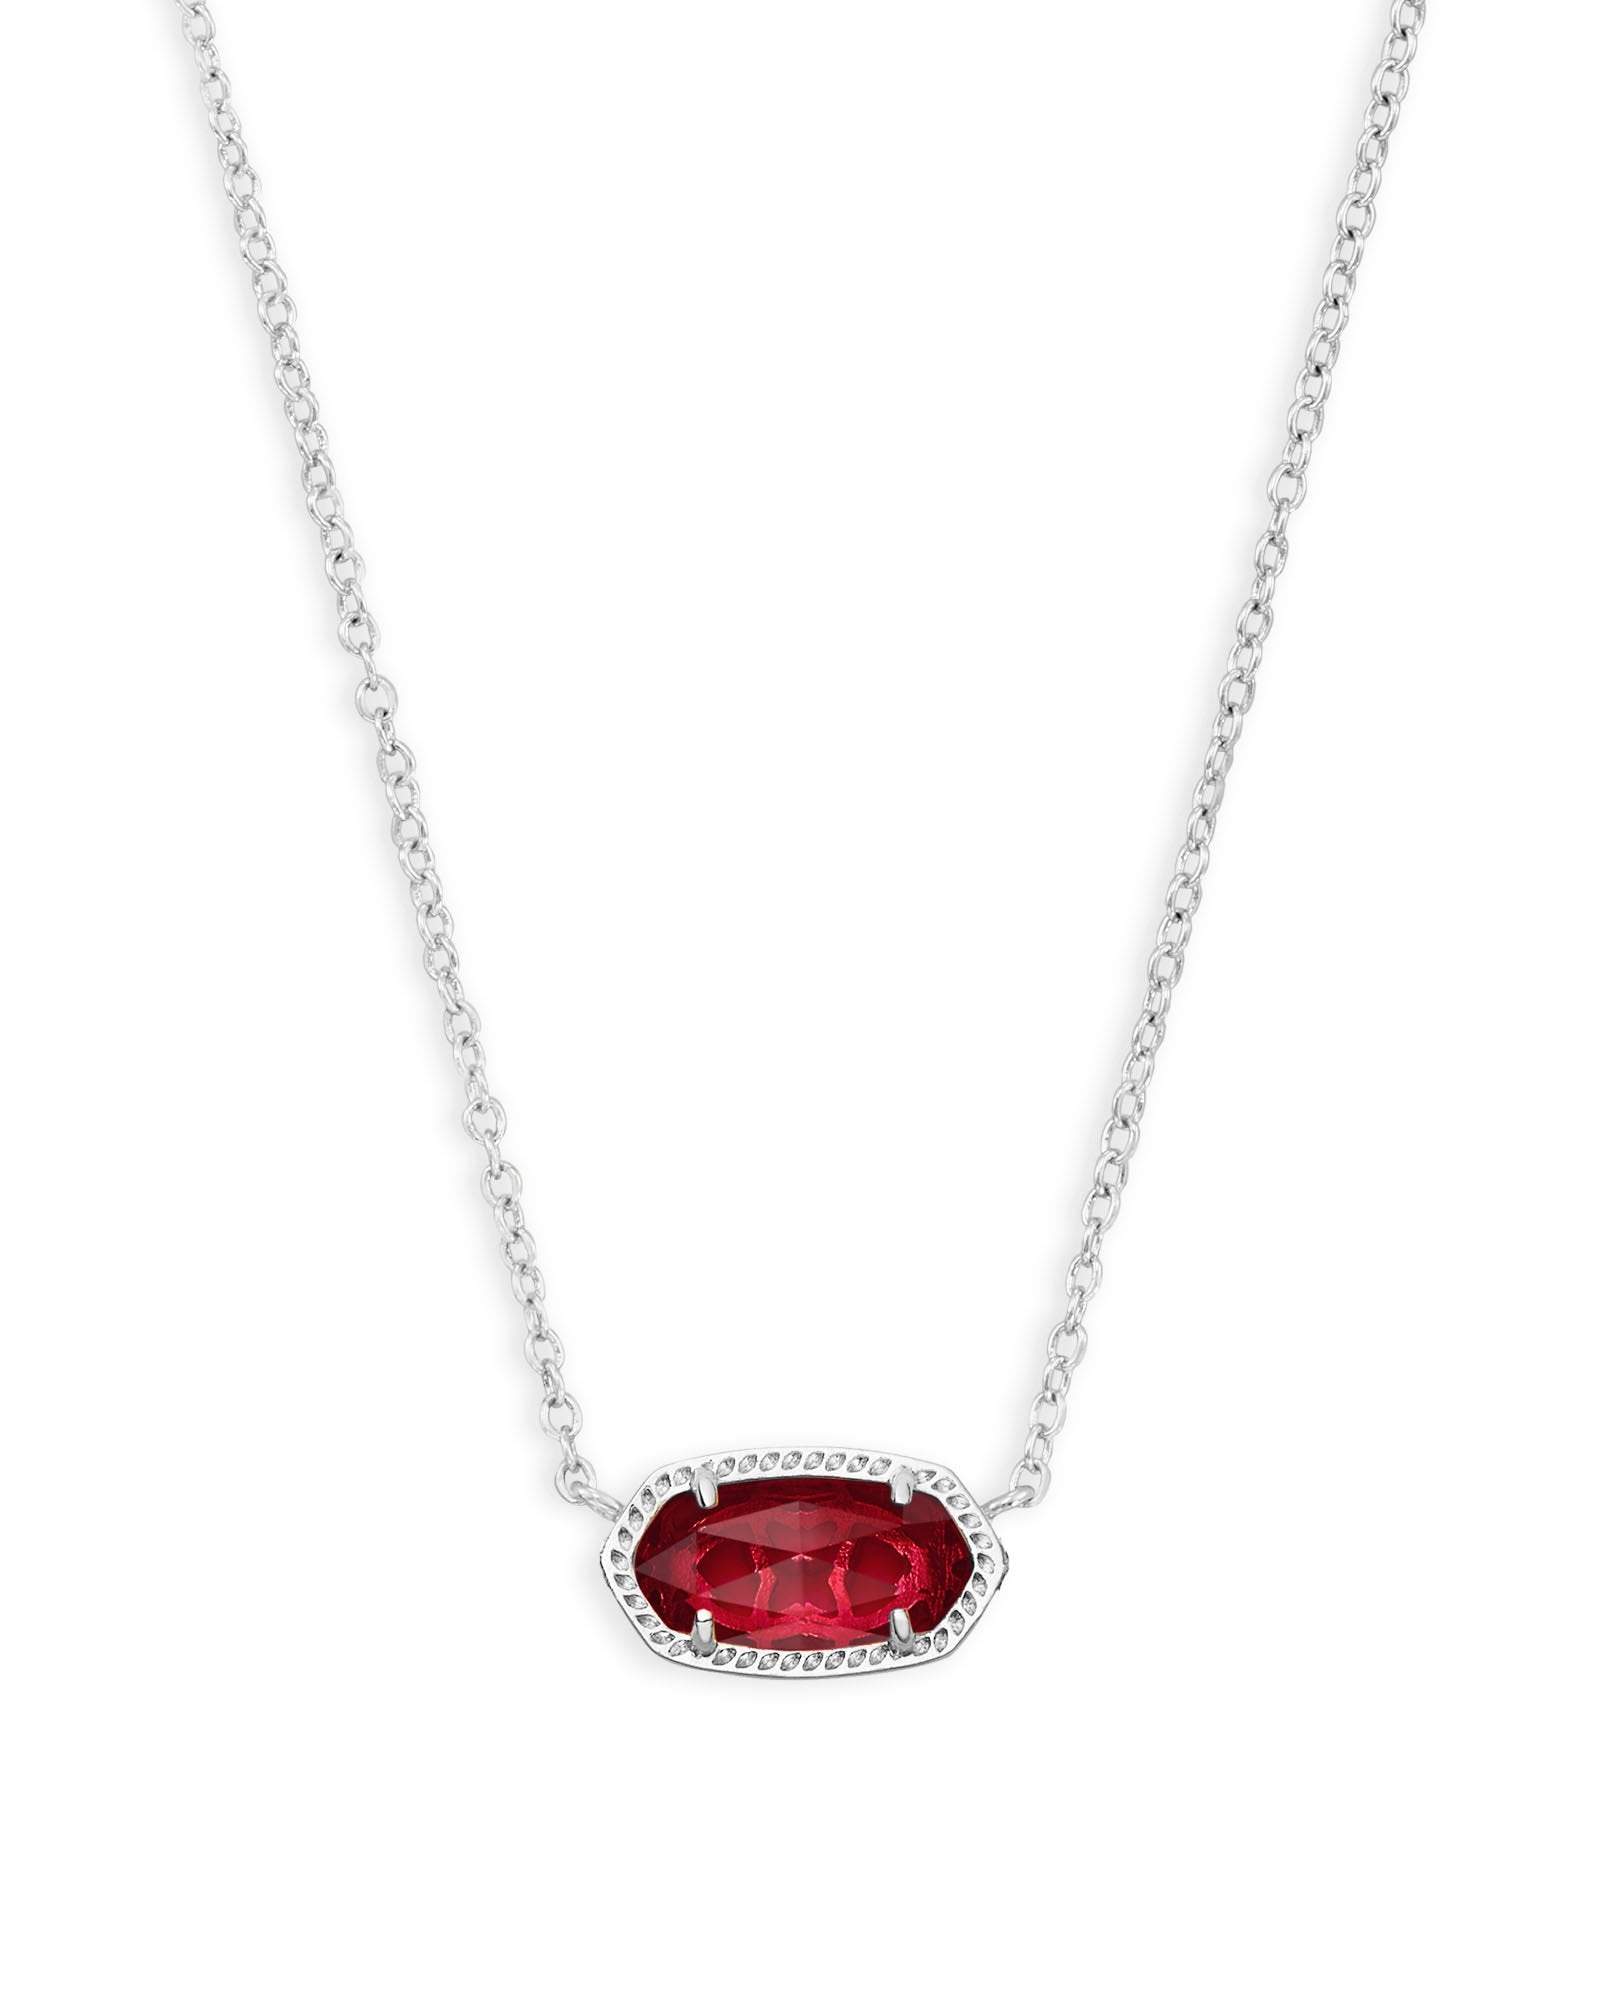 Elisa Silver Pendant Necklace - Berry Front View